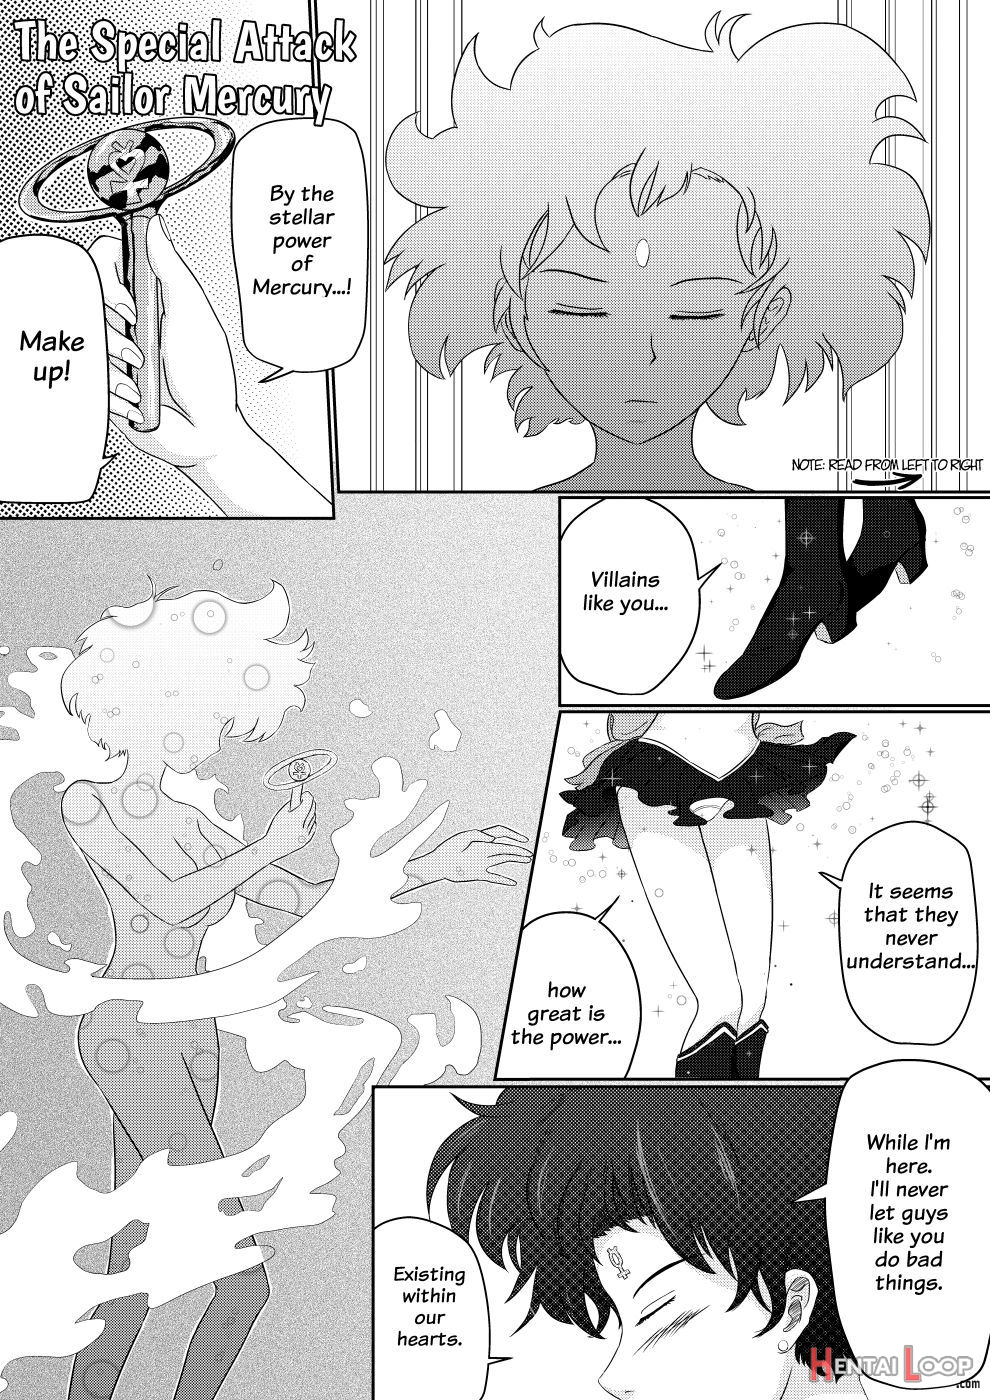 The Special Attack Of Sailor Mercury 02 page 2